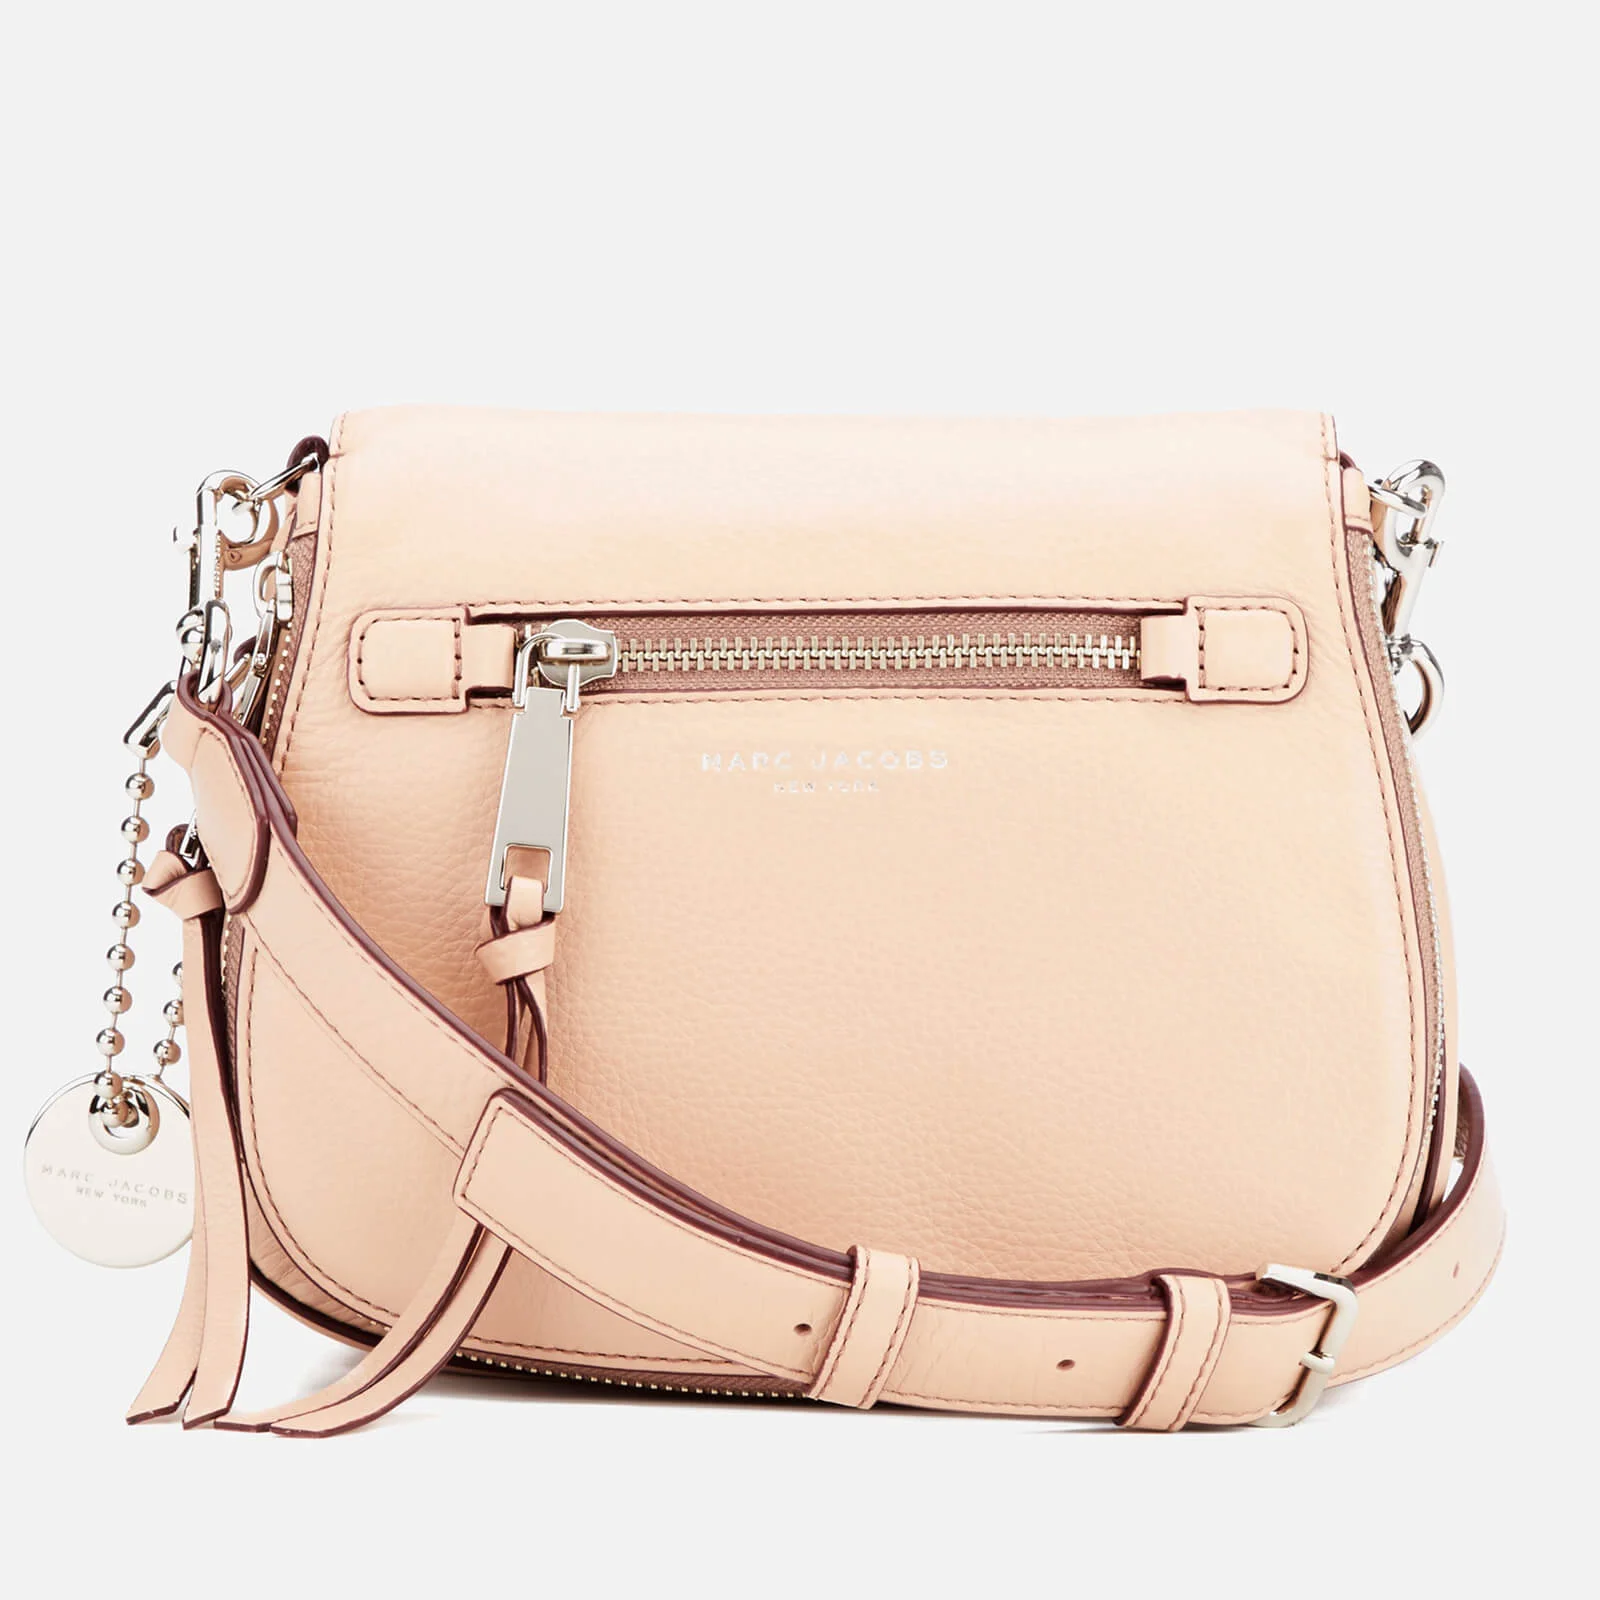 Marc Jacobs Women's Recruit Small Saddle Bag - Nude Image 1